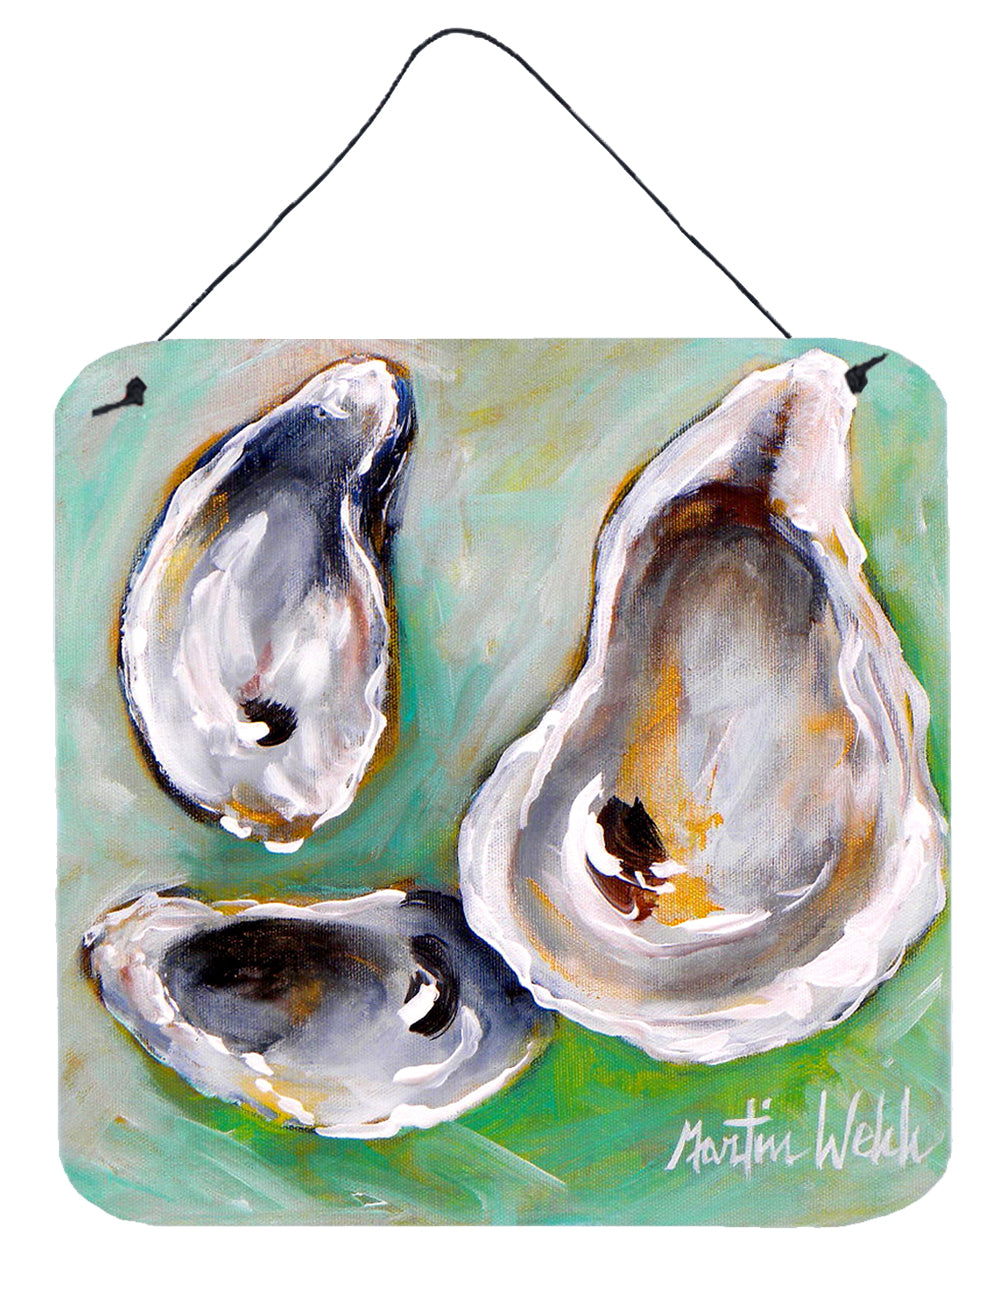 Buy this Oyster The Eye of The Oyster Wall or Door Hanging Prints